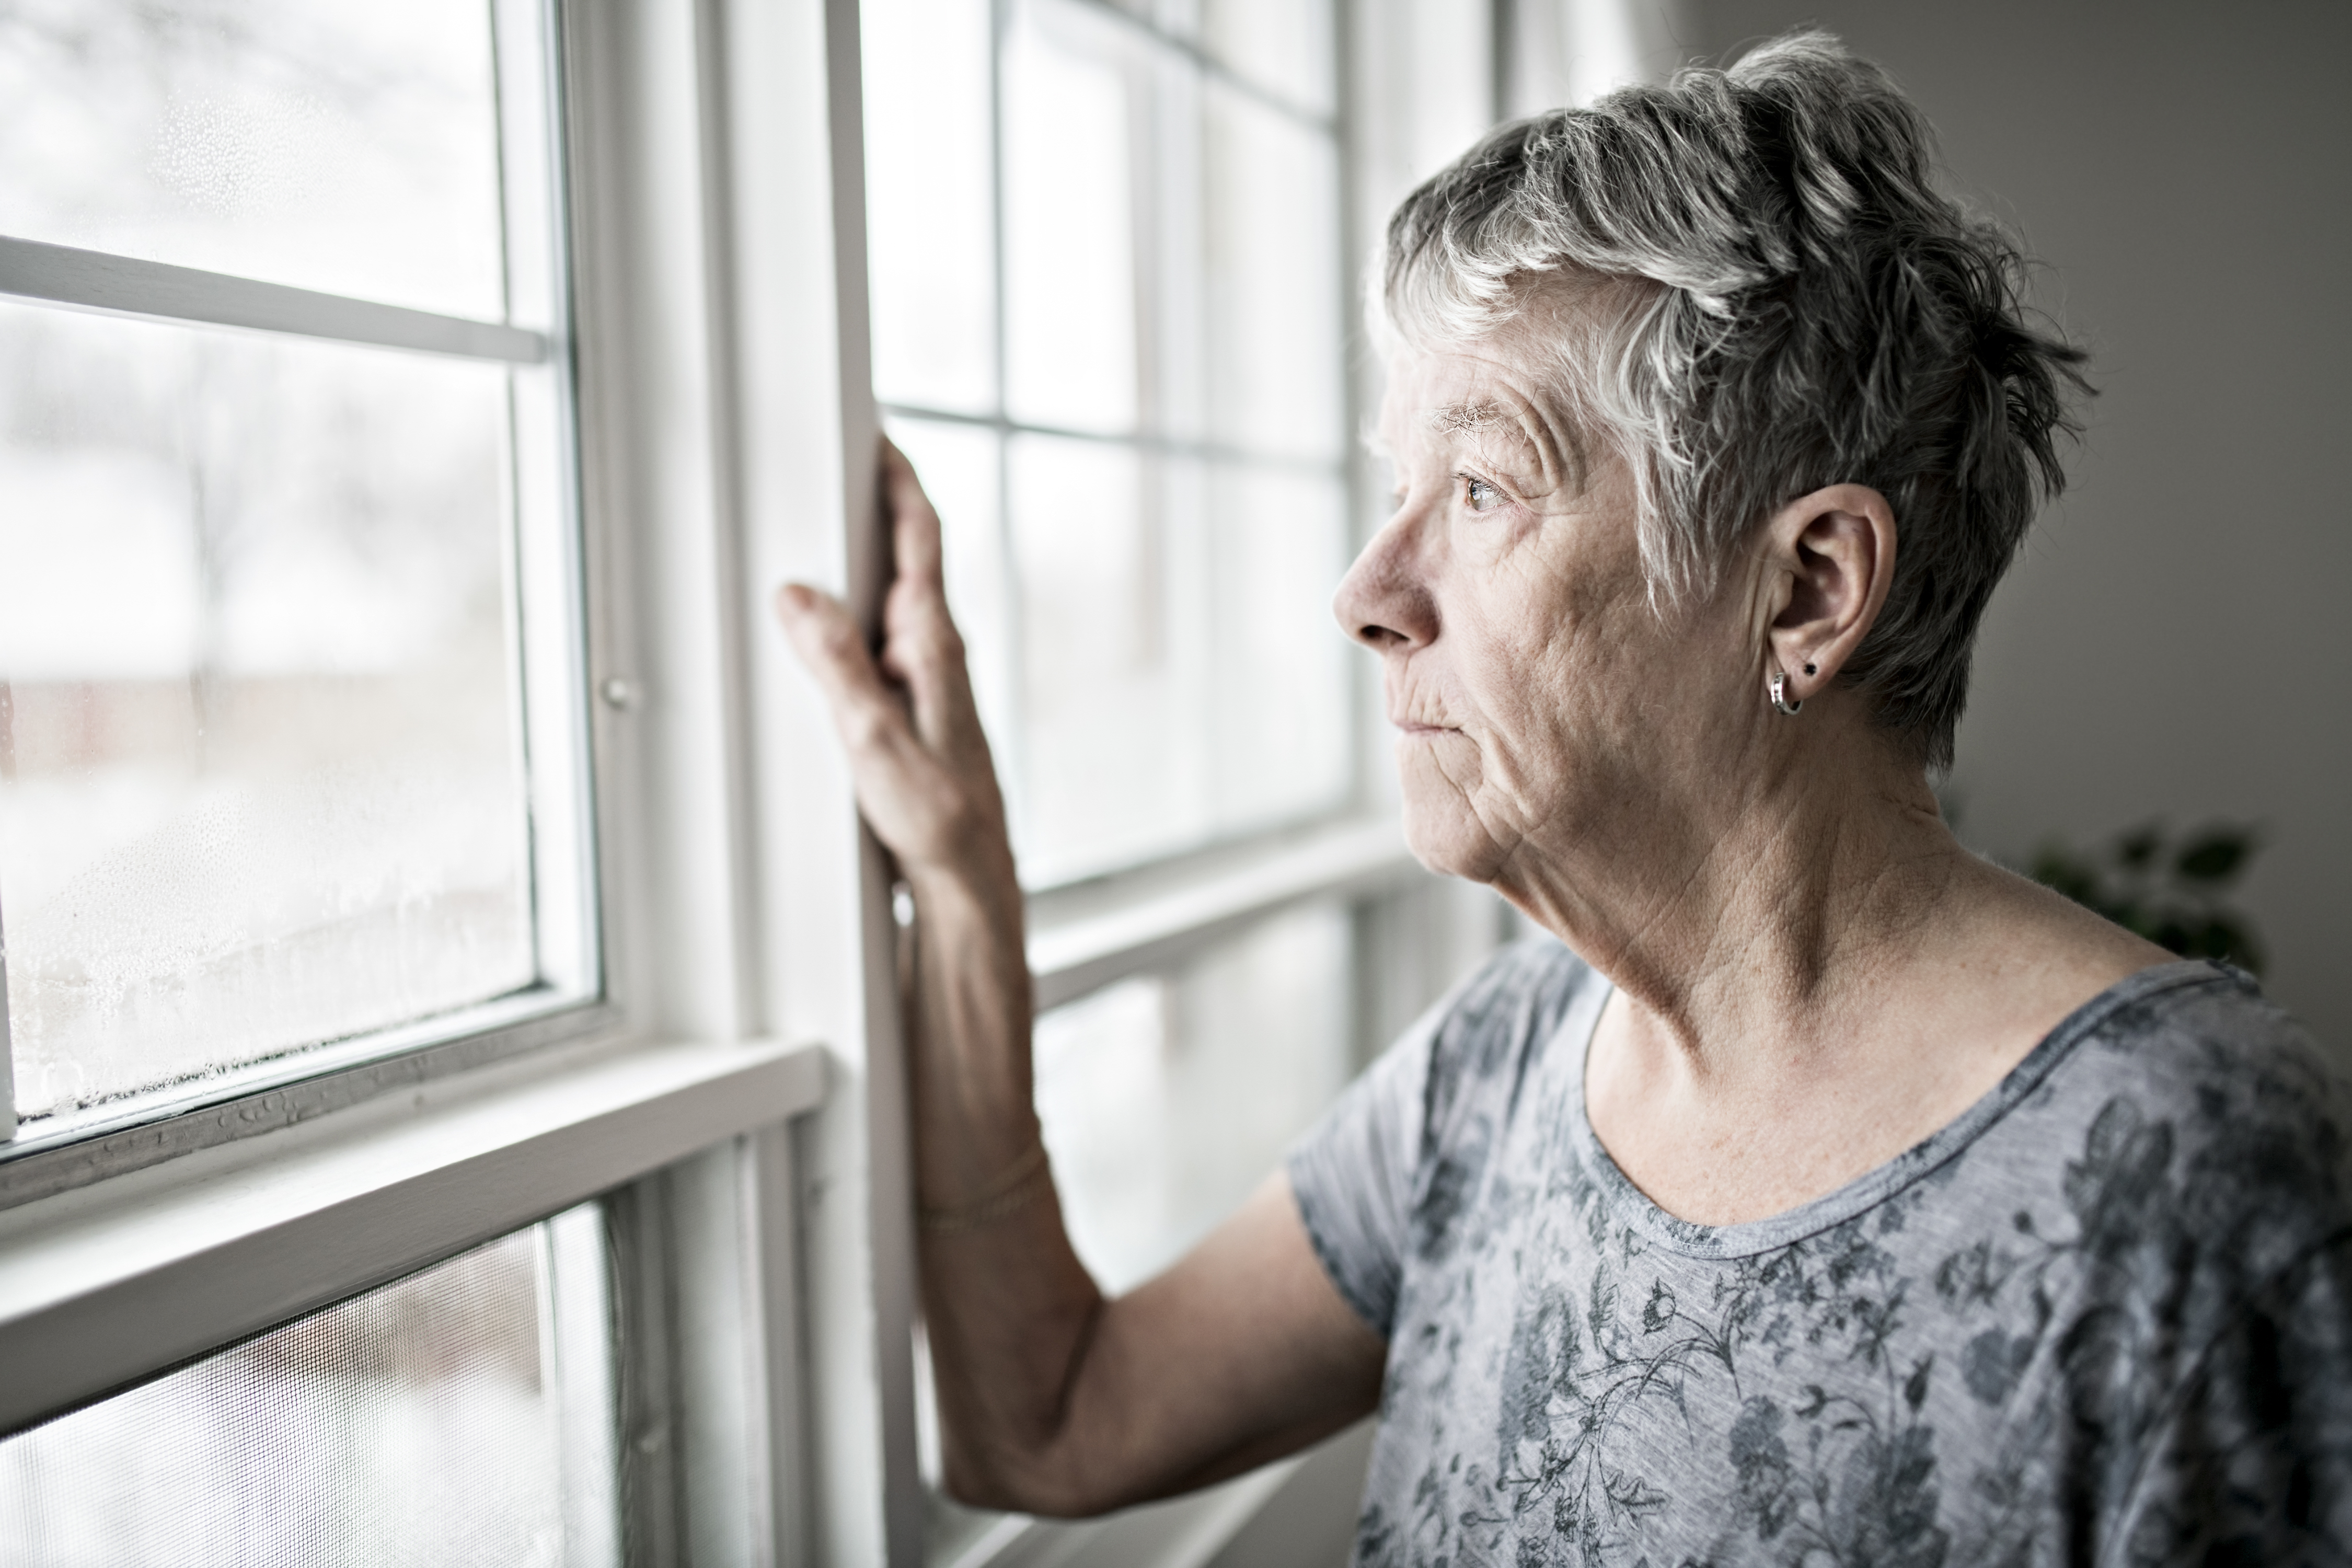 Upset senior woman staring out a window | Source: Getty Images